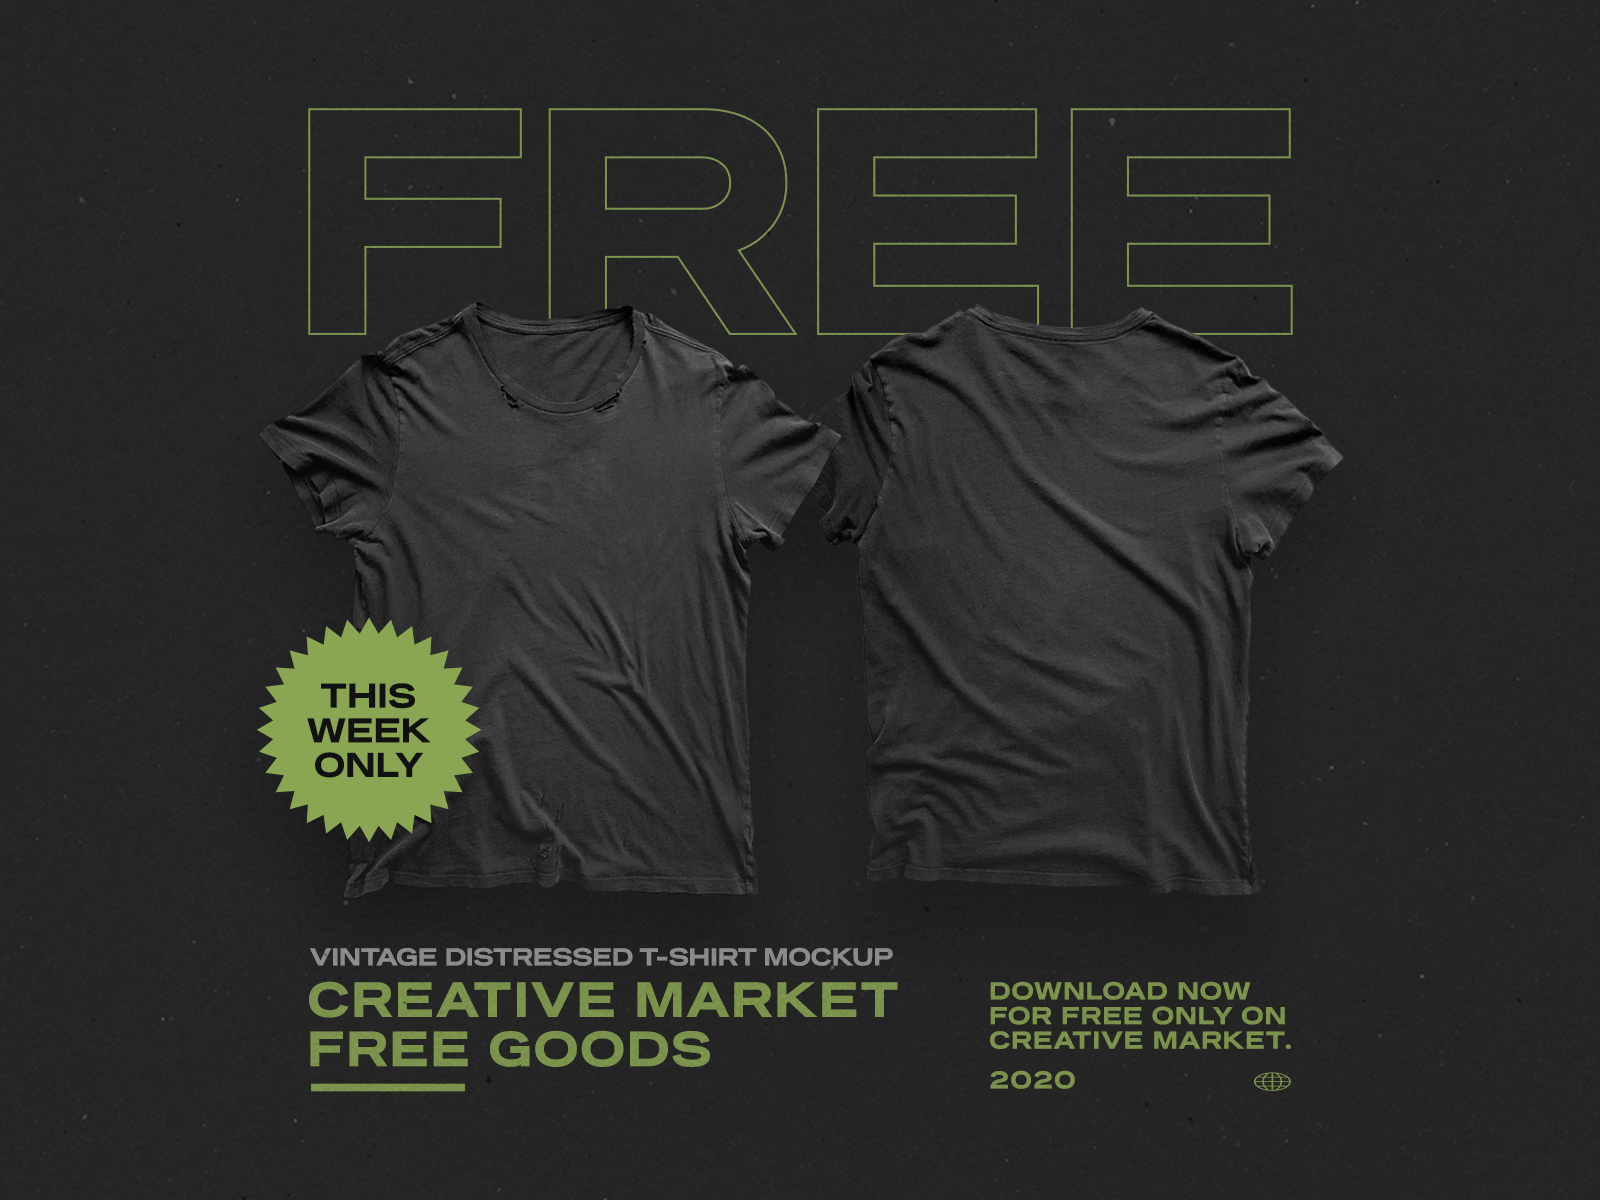 Download Creative Market Free Good Of The Week By Clint English On Dribbble